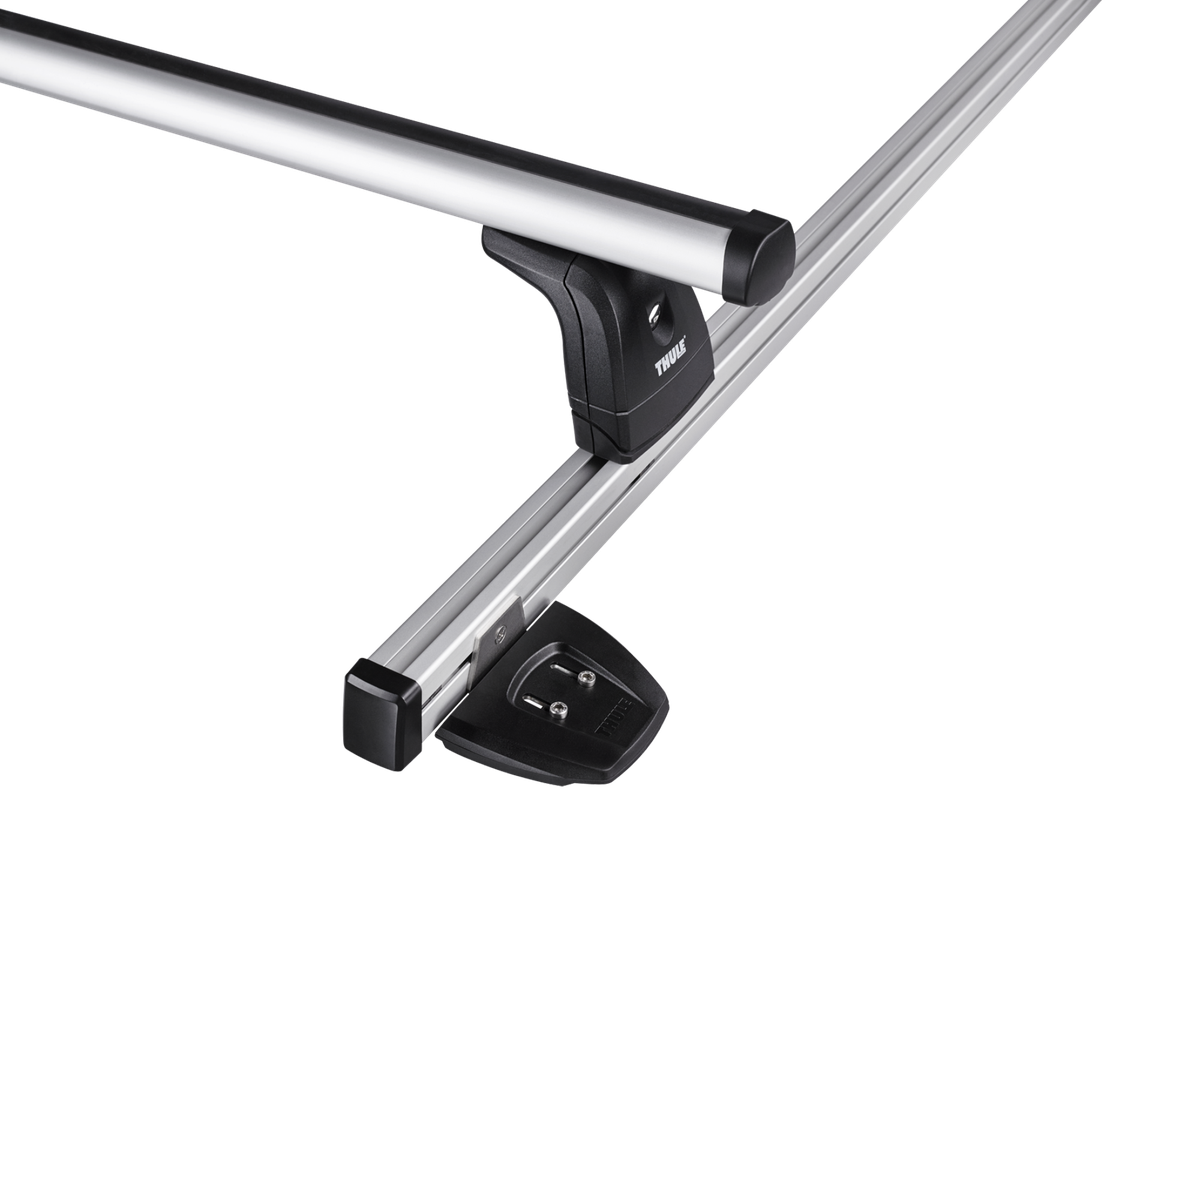 Thule SmartClamp System for TO 6300/6200 Pack van roof rack base rails